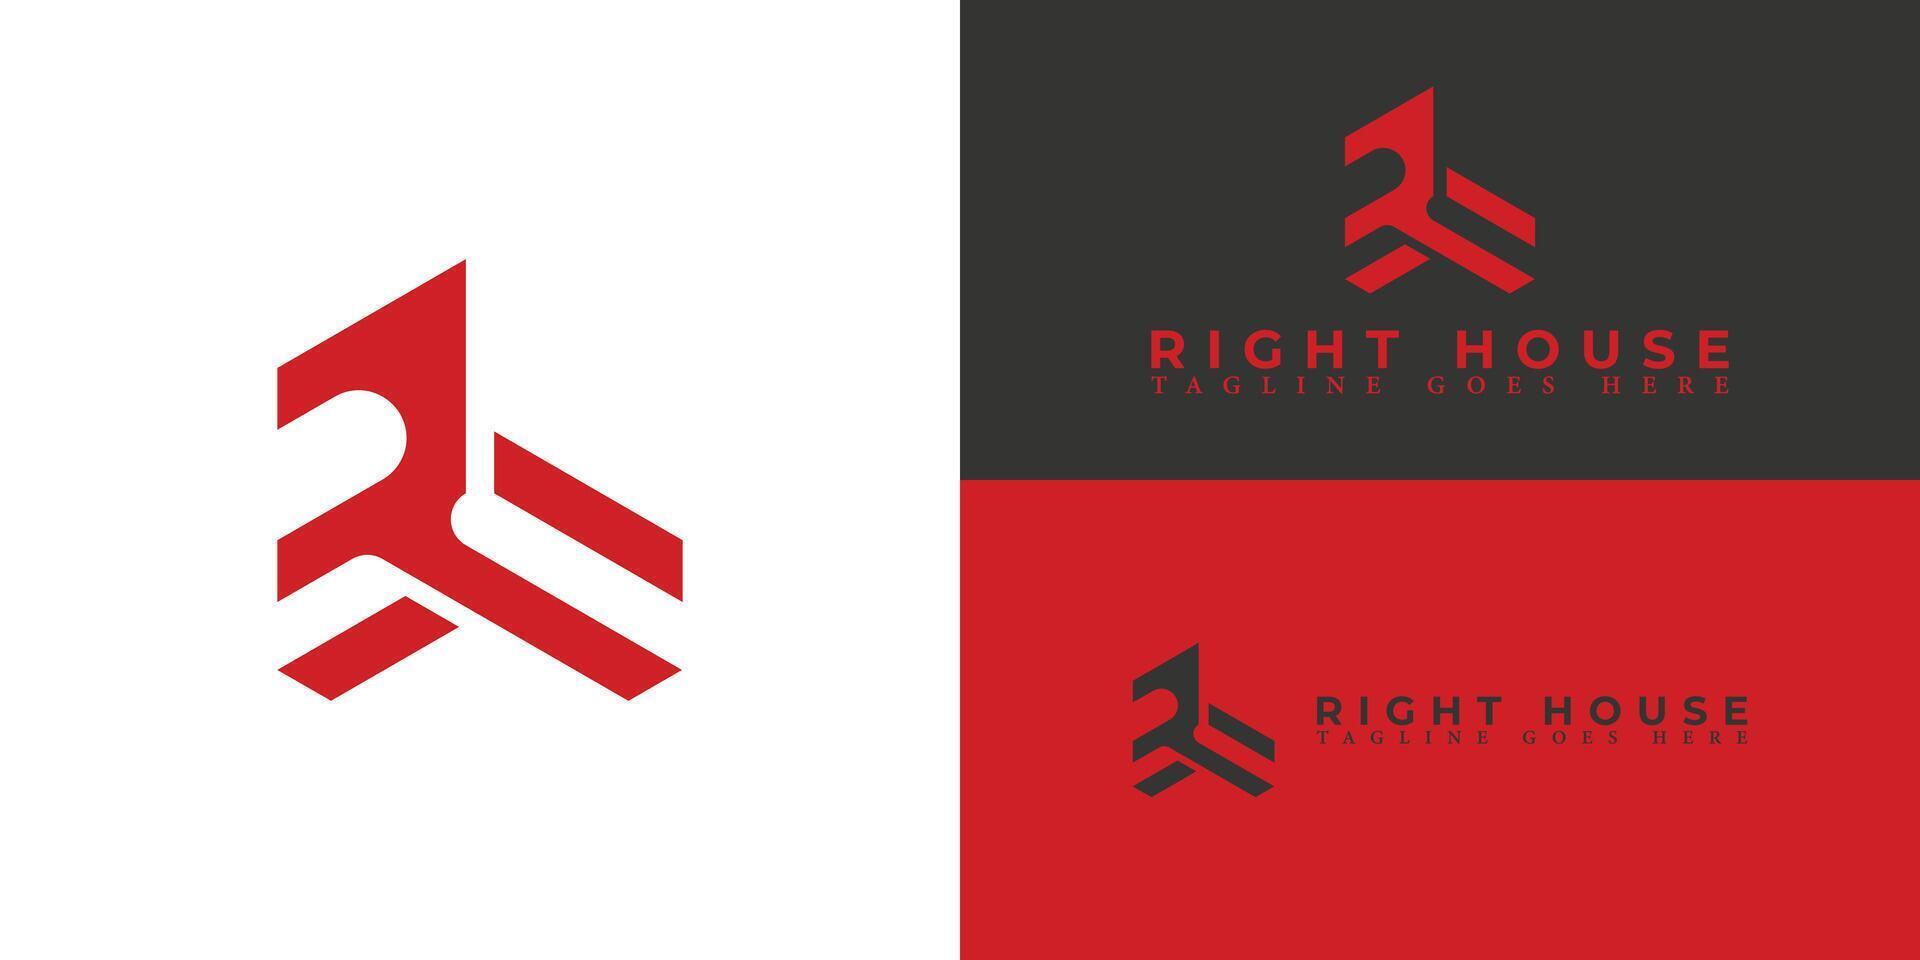 Abstract Initial Letter RH or HR Logo with Home Symbol Icon vector in red color isolated on multiple background colors. The logo is applied for real estate business logo design inspiration template